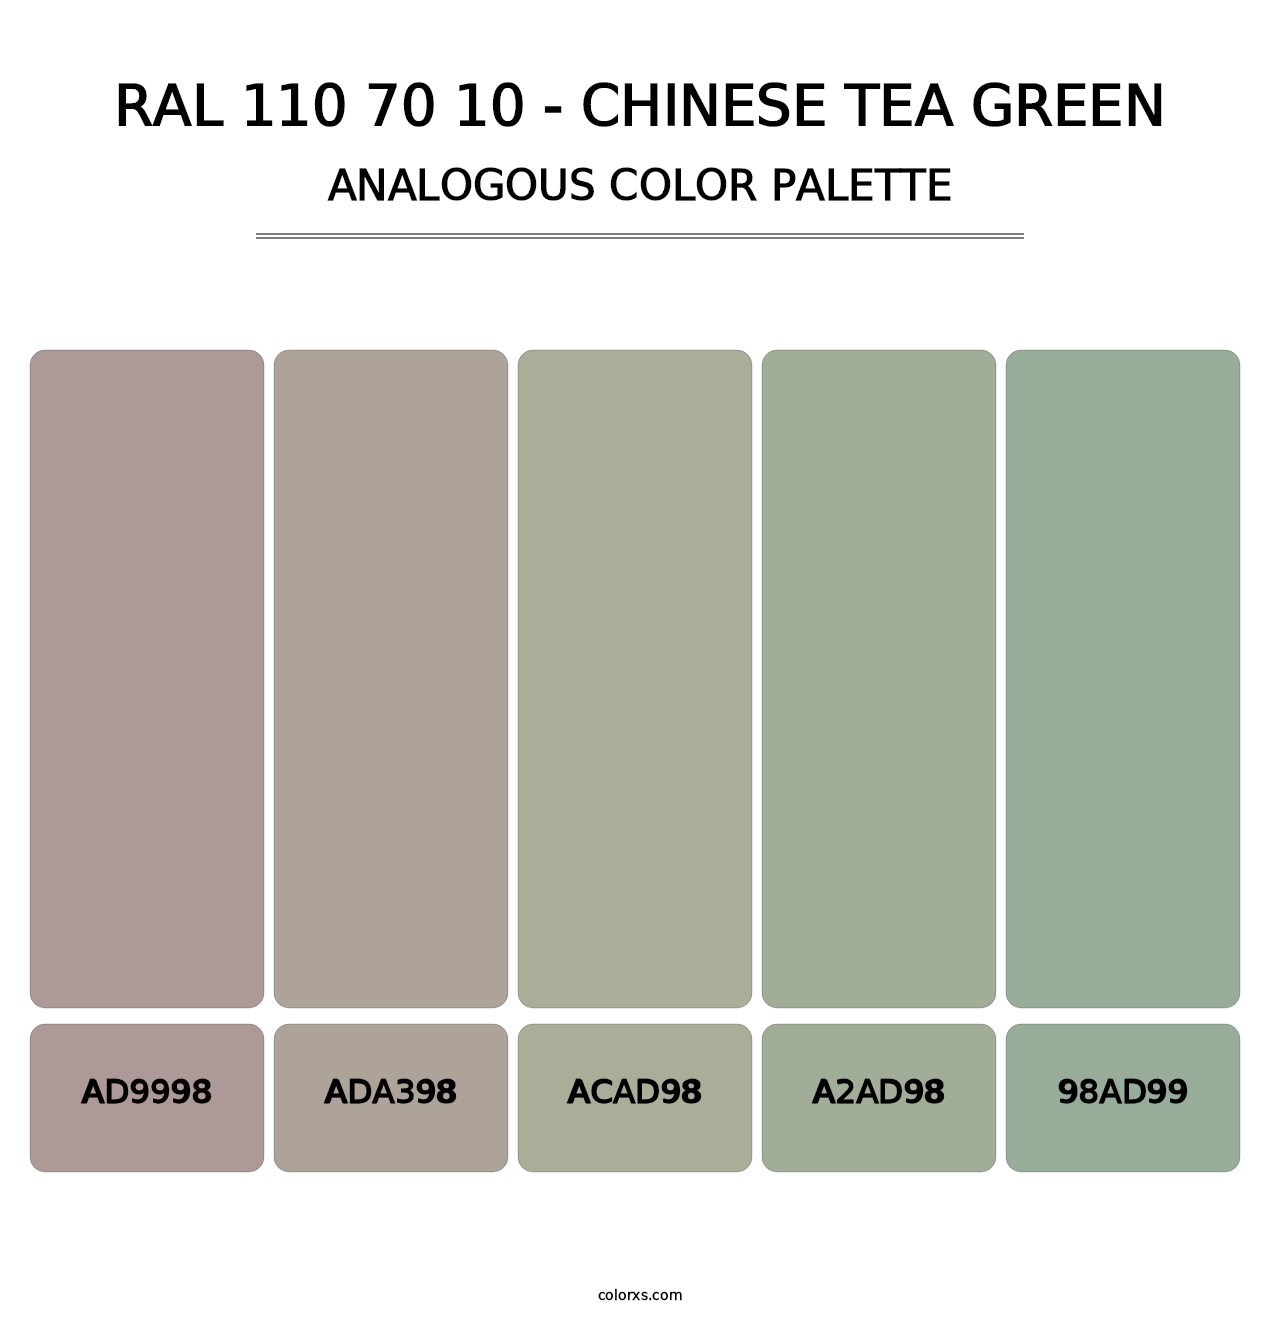 RAL 110 70 10 - Chinese Tea Green - Analogous Color Palette